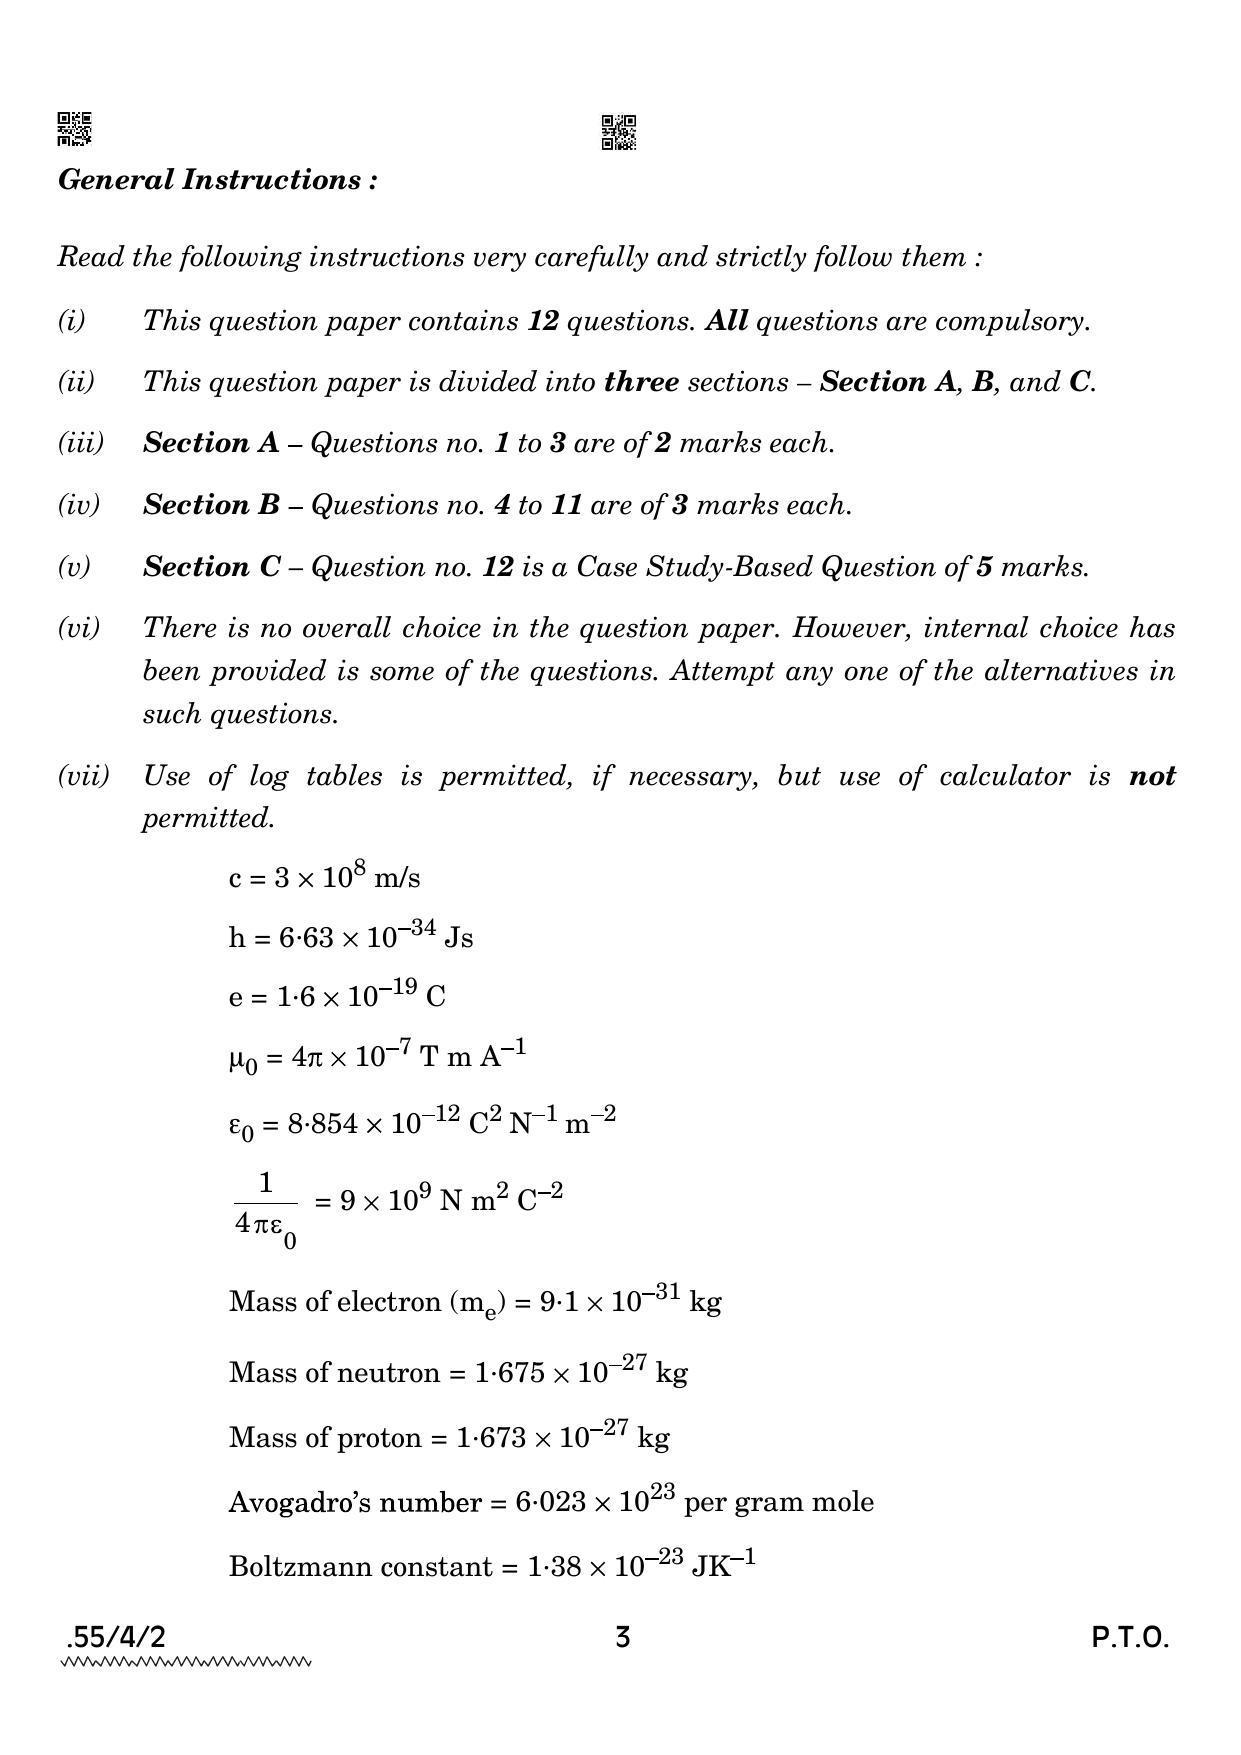 CBSE Class 12 55-4-2 Physics 2022 Question Paper - Page 3